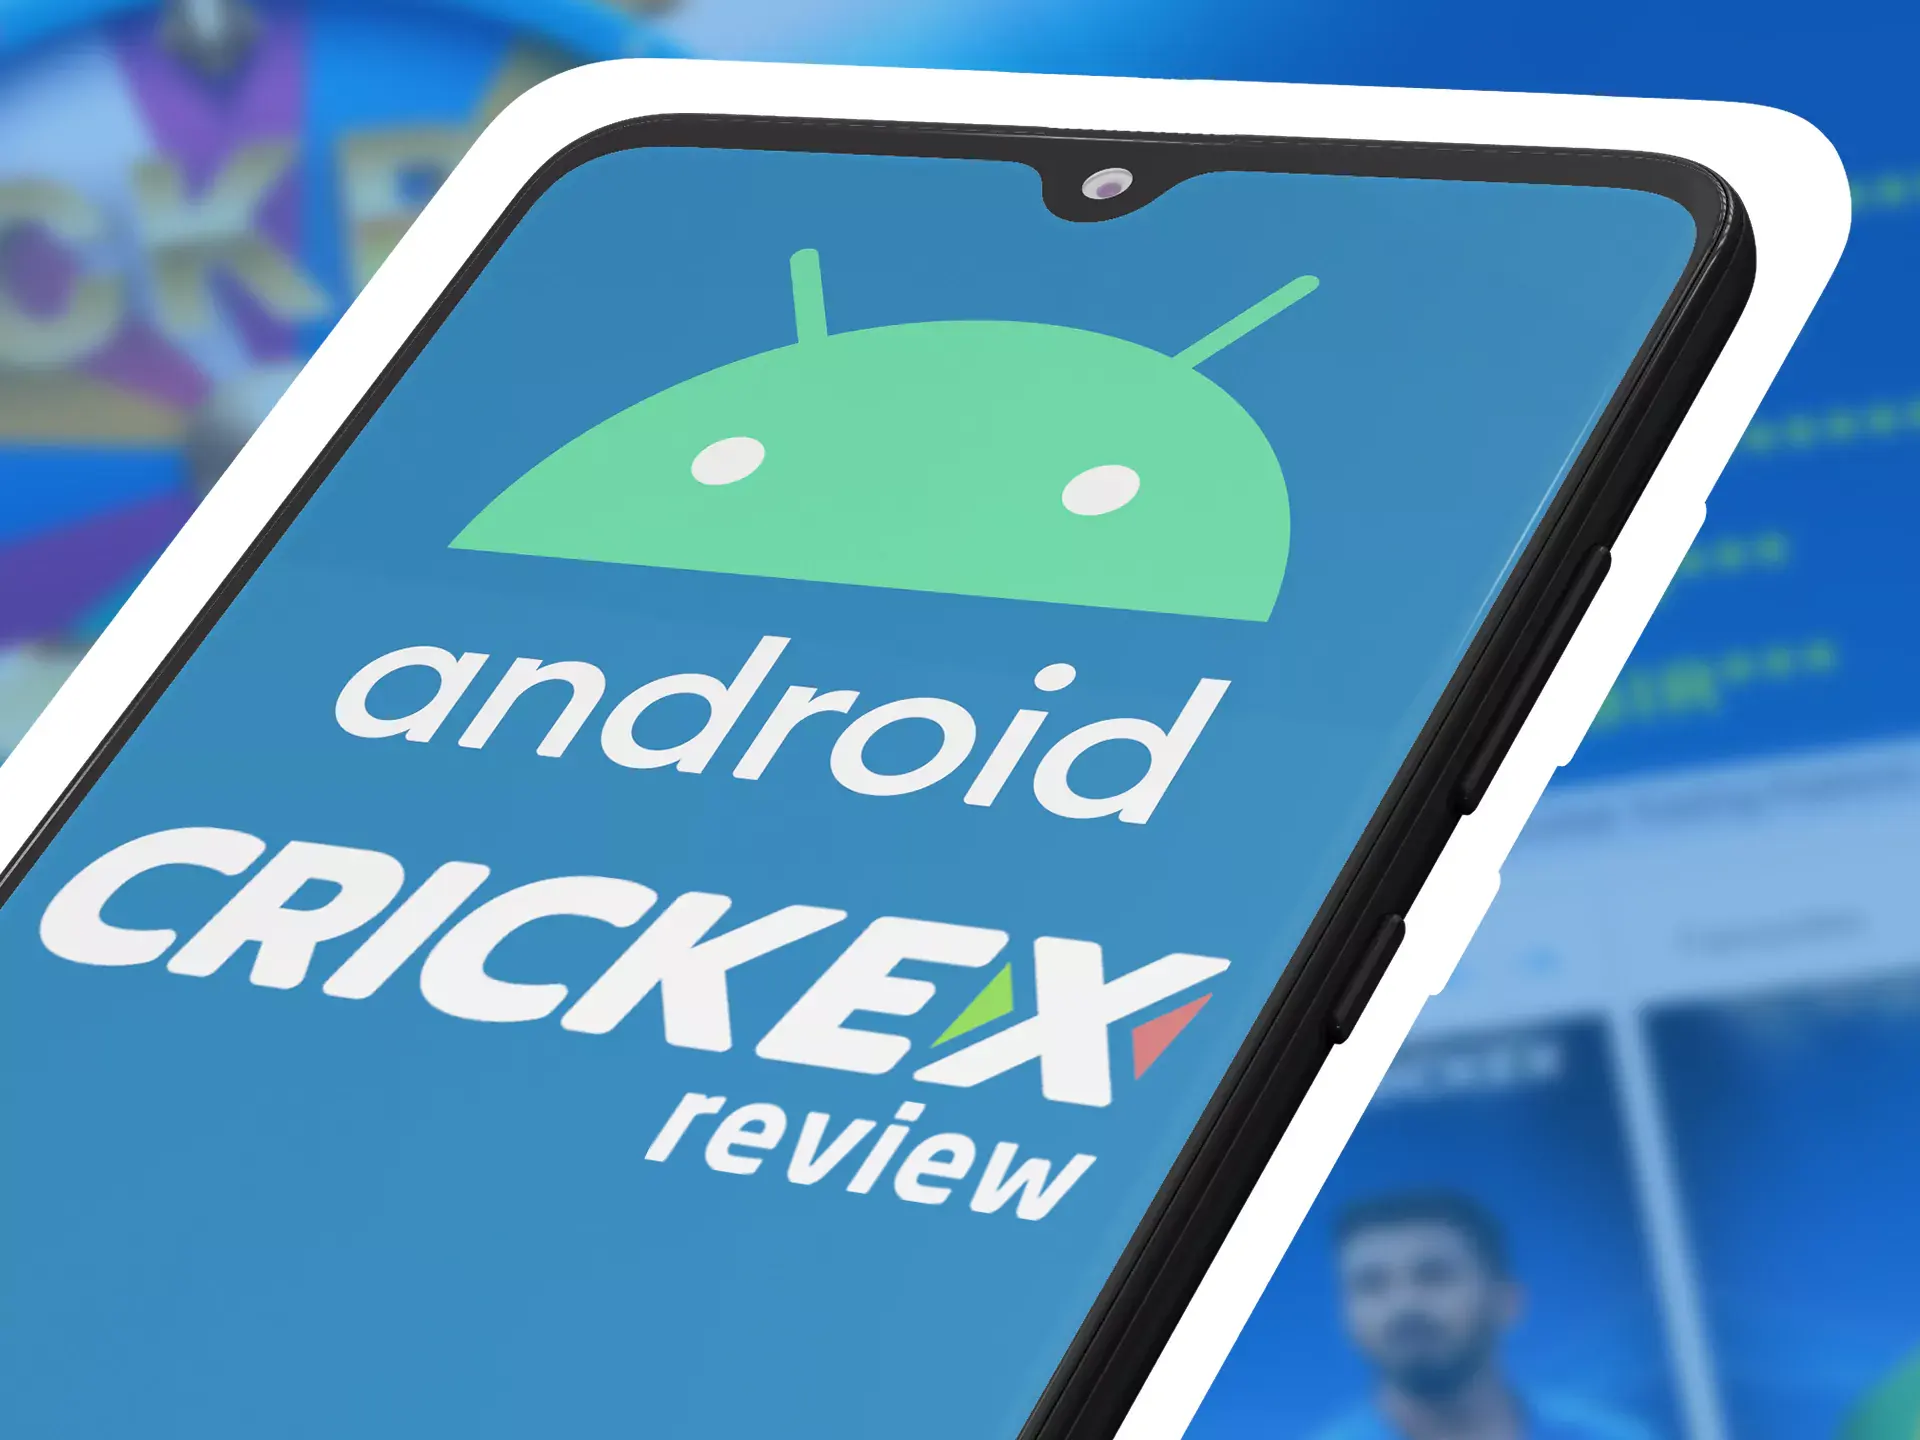 Download Crickex app on your Android device.